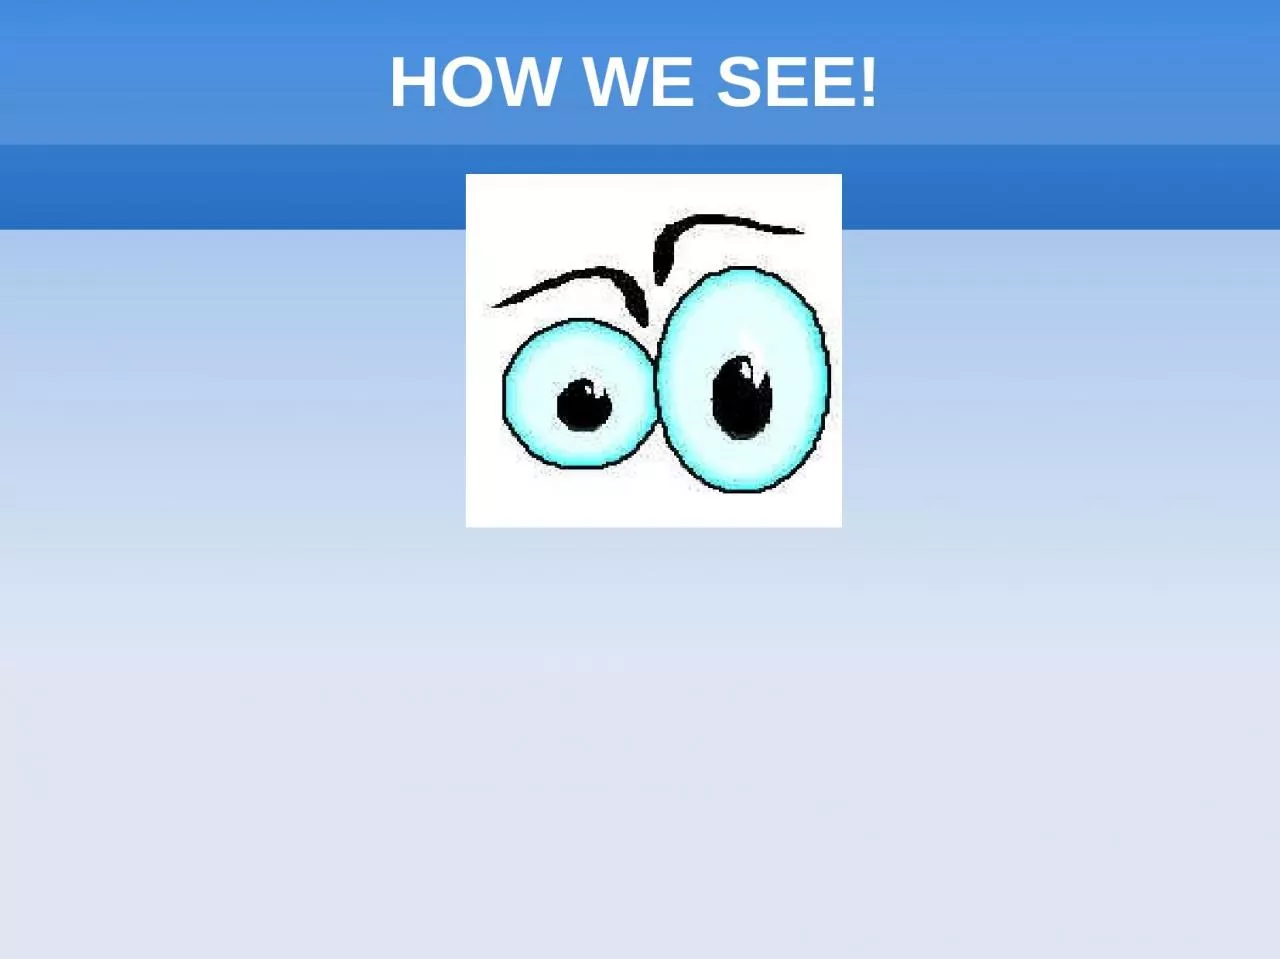 HOW WE SEE! Eye Structure